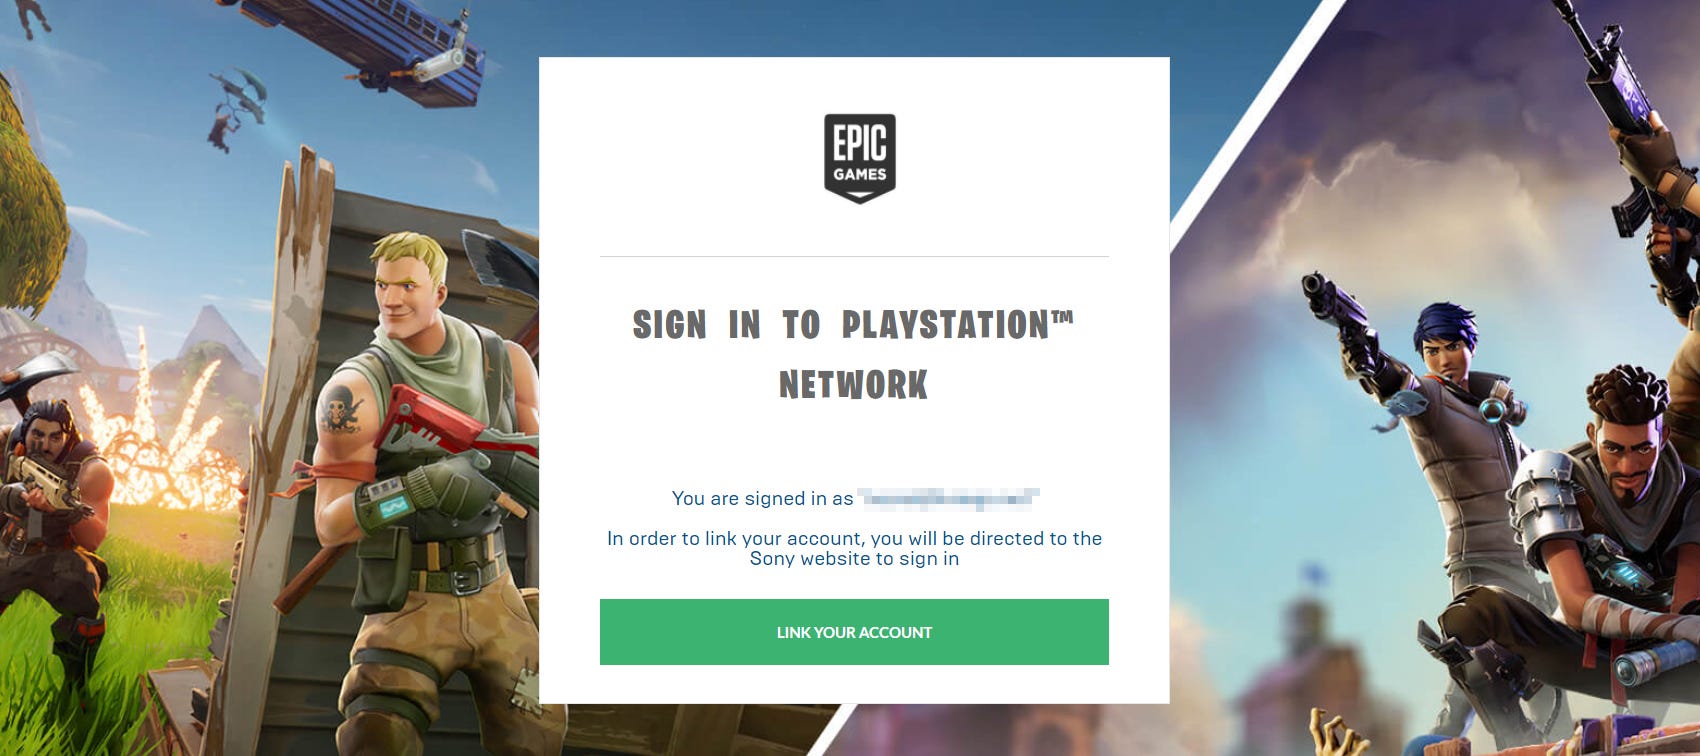 Gaming Ux Fortnite Account Nightmare Jason Krieger Medium - clicking the connect button takes you to another page why that tells you you re signed in with a certain email address for your fortnite account and